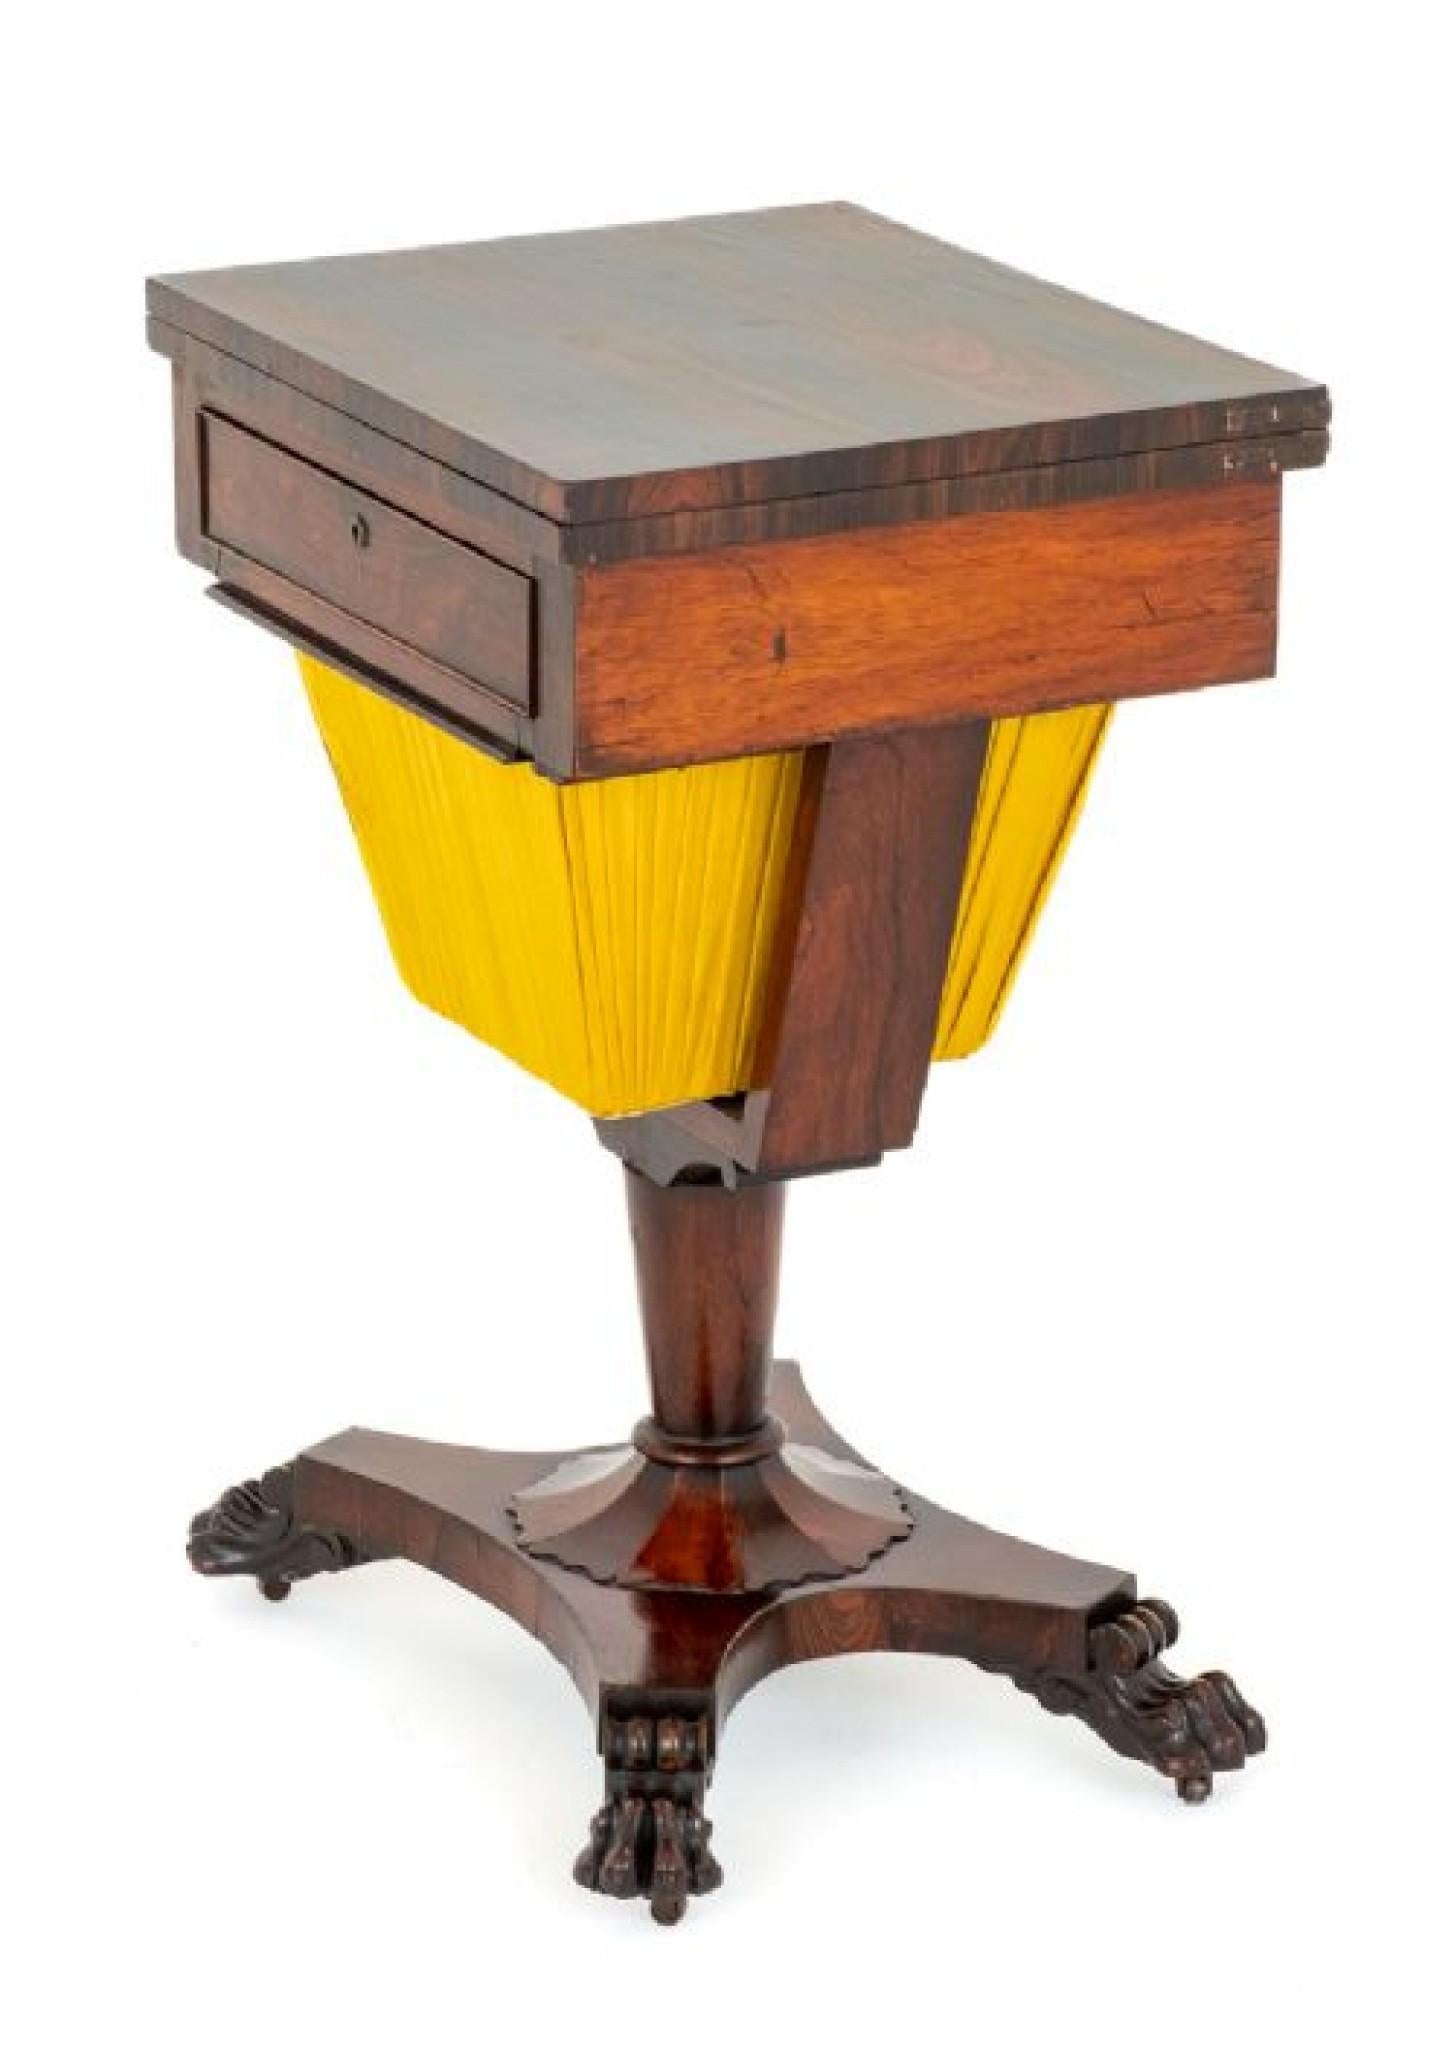 Regency Sewing / Games Table.
Period Regency
This Pretty Table Stands Upon a Platform Base With Carved Lions Paw Feet.
The Table is Supported on a Turned Column with a Shaped Base.
The Sewing Basket has Recently Been Re Lined.
Above the Basket There